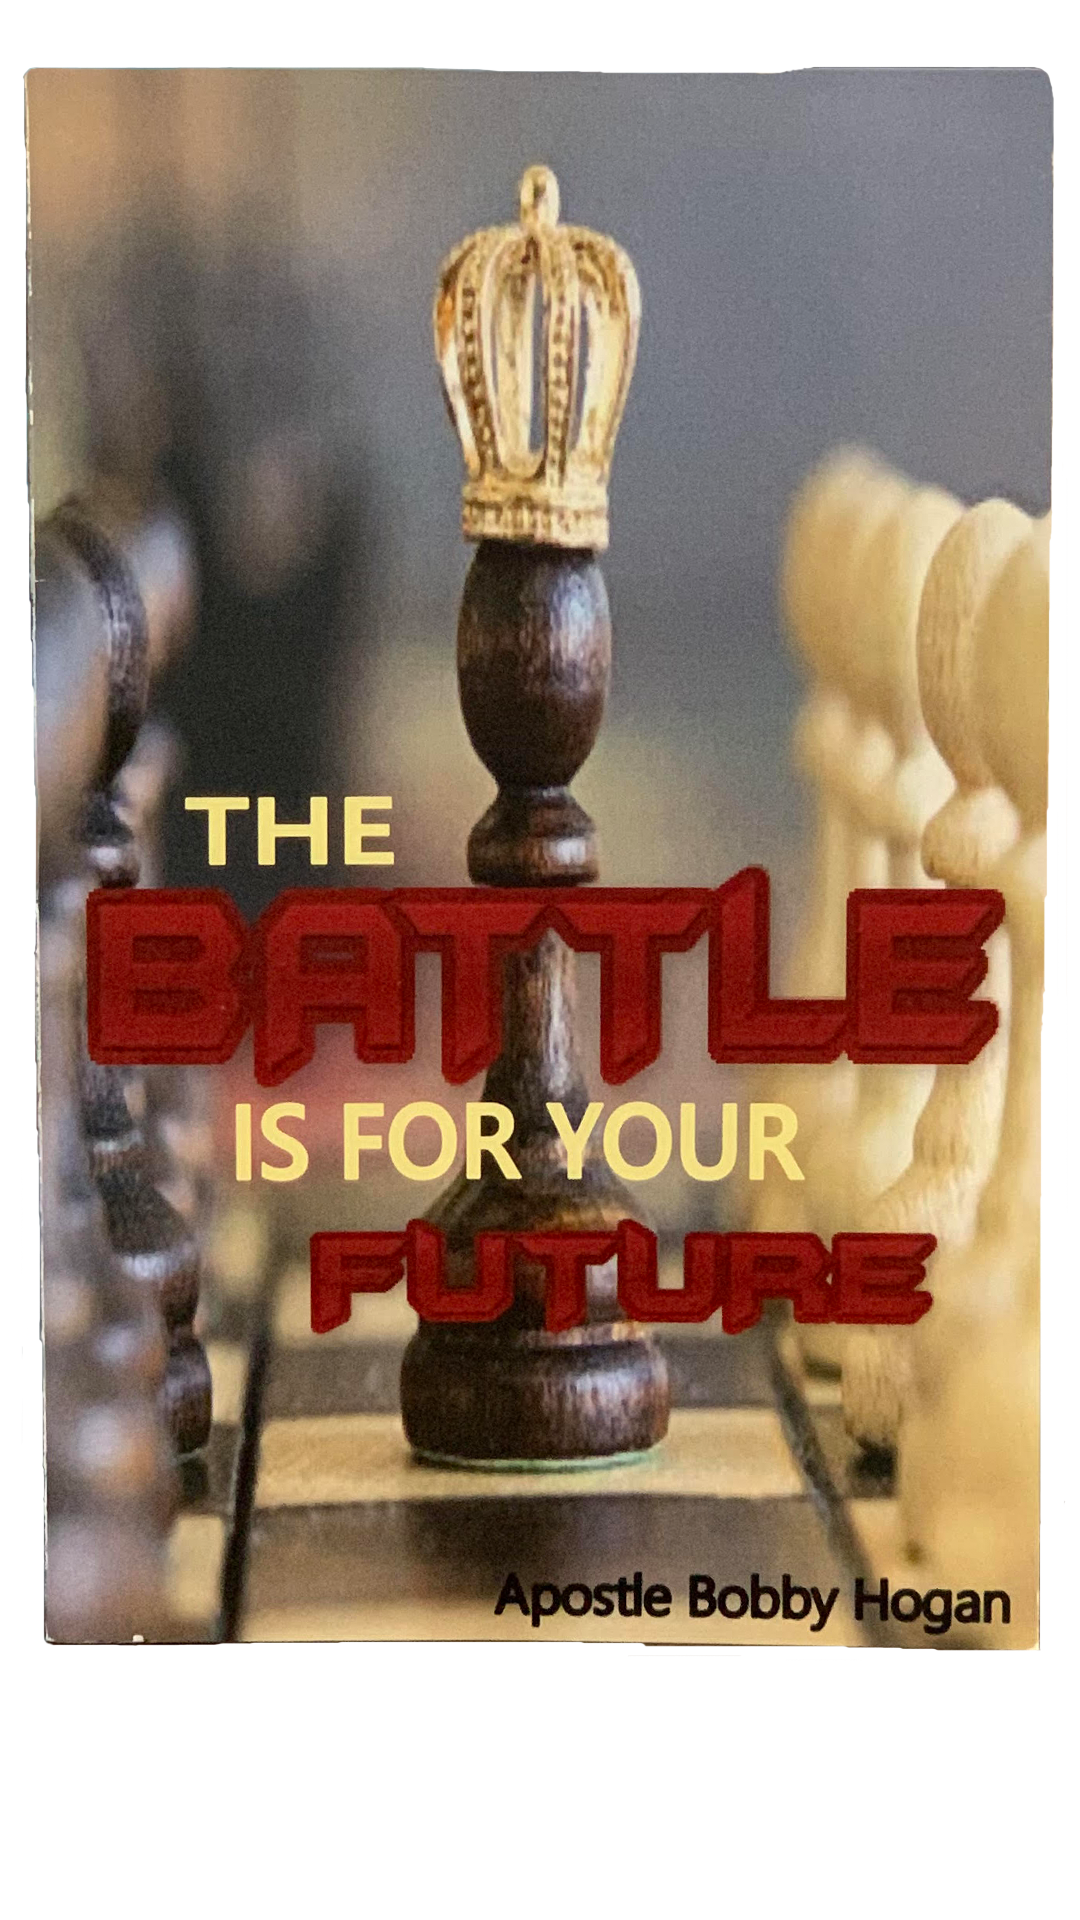 The Battle Is For Your Future